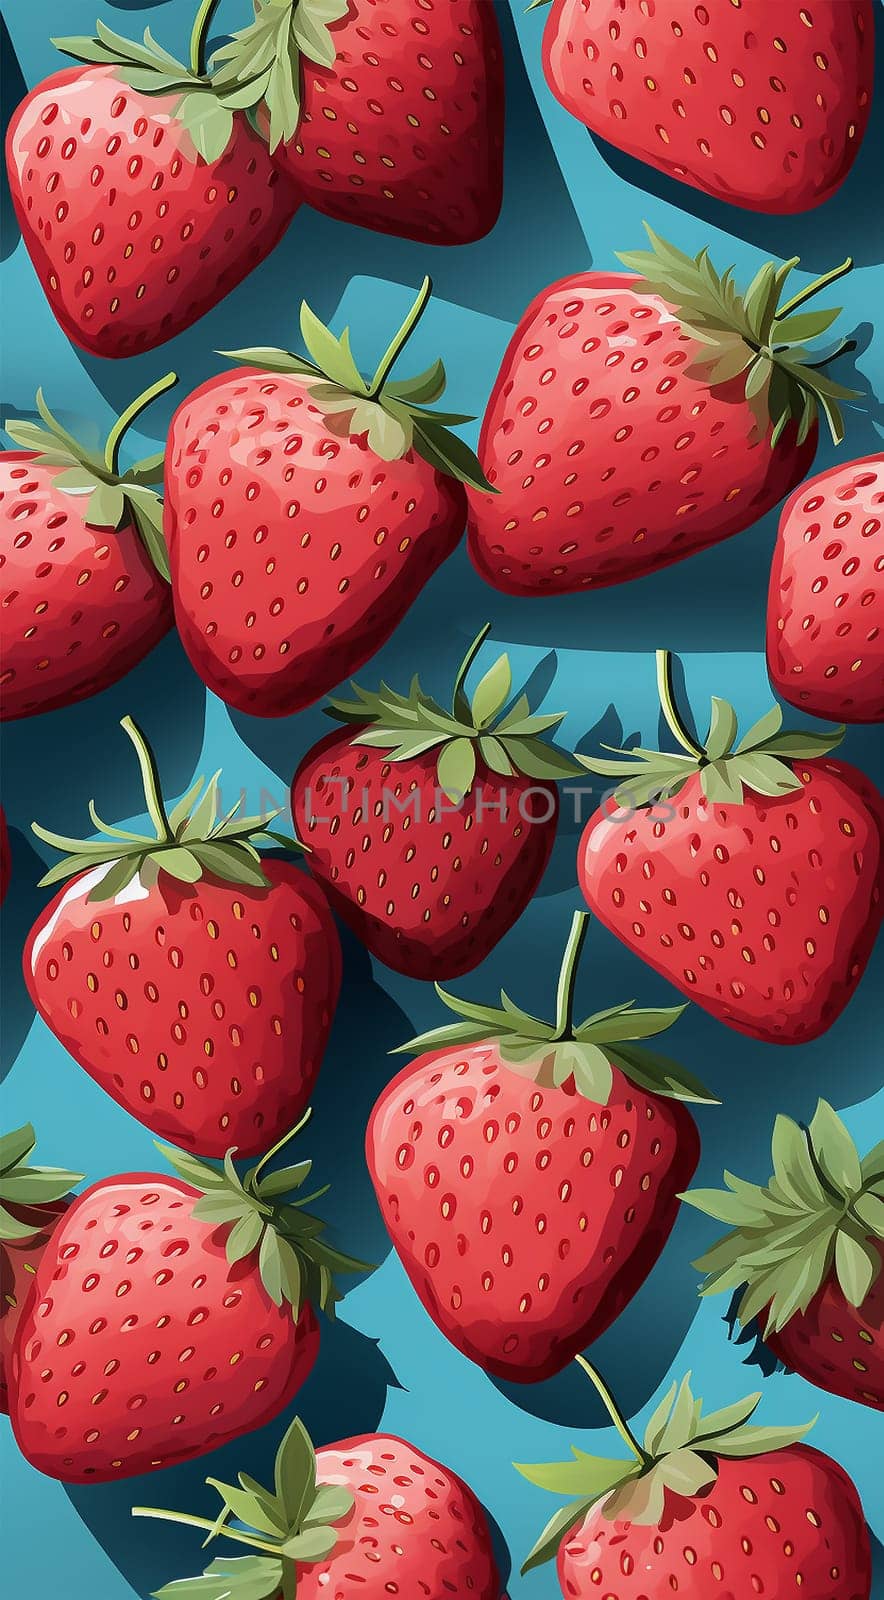 Cute Strawberry Pattern, Red and blue seamless polka dot strawberry, Strawberry white Background, Strawberry Wallpaper Love Cards Stock Illustration. Adorable strawberries background by Annebel146